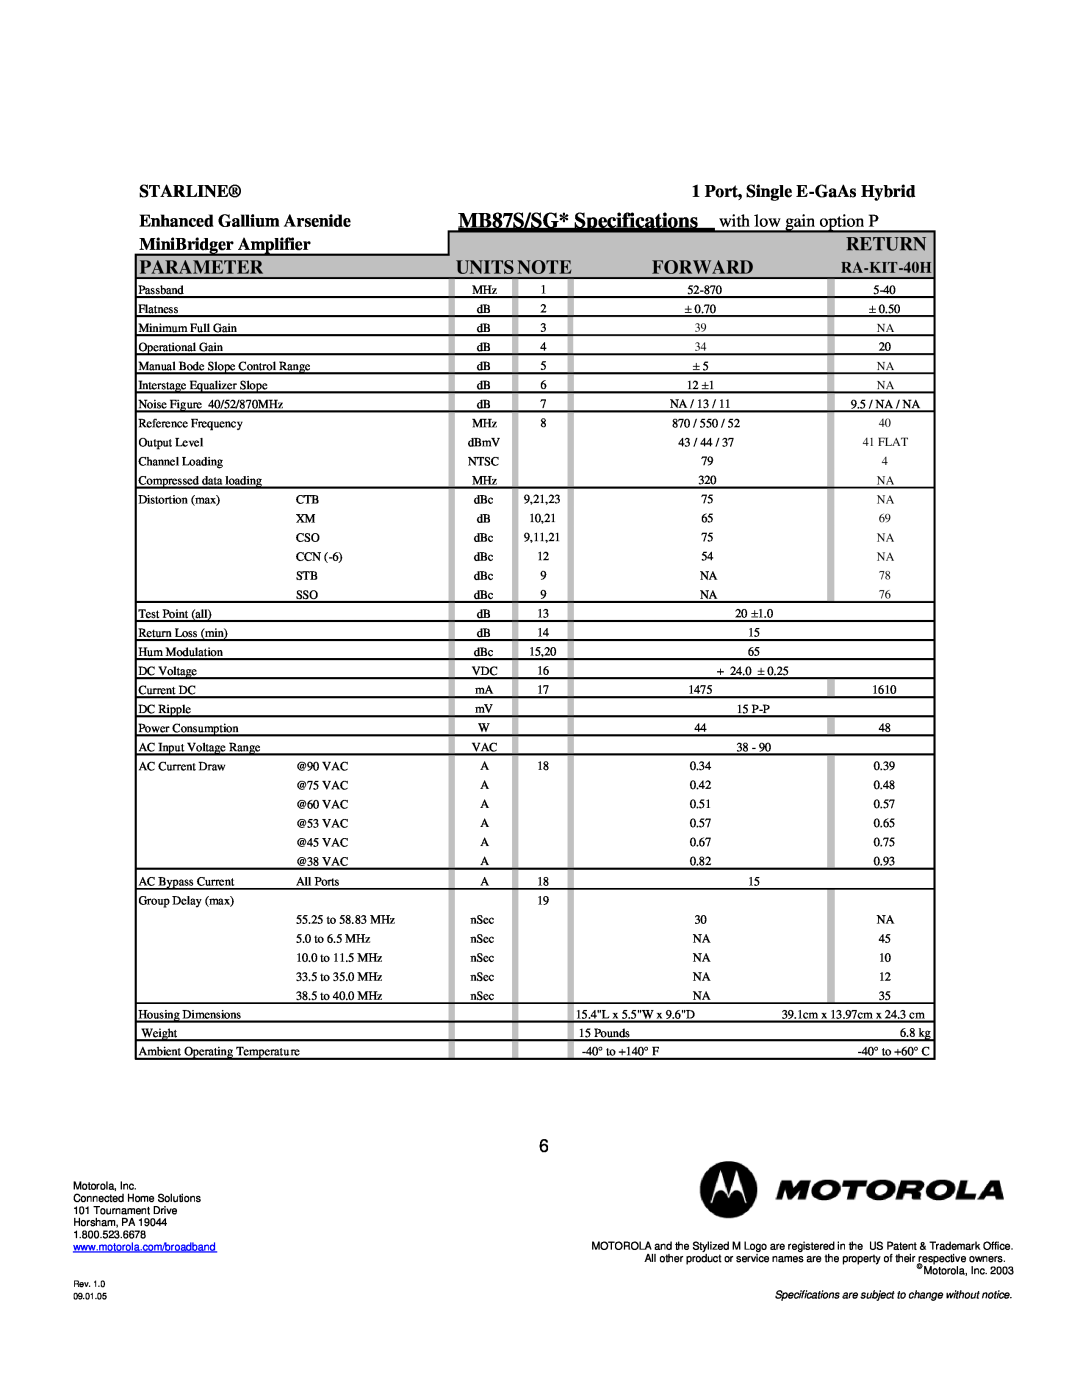 Motorola MB87S/SG* Specifications with low gain option P, Units Note, Parameter, Forward, Return, Starline, RA-KIT-40H 